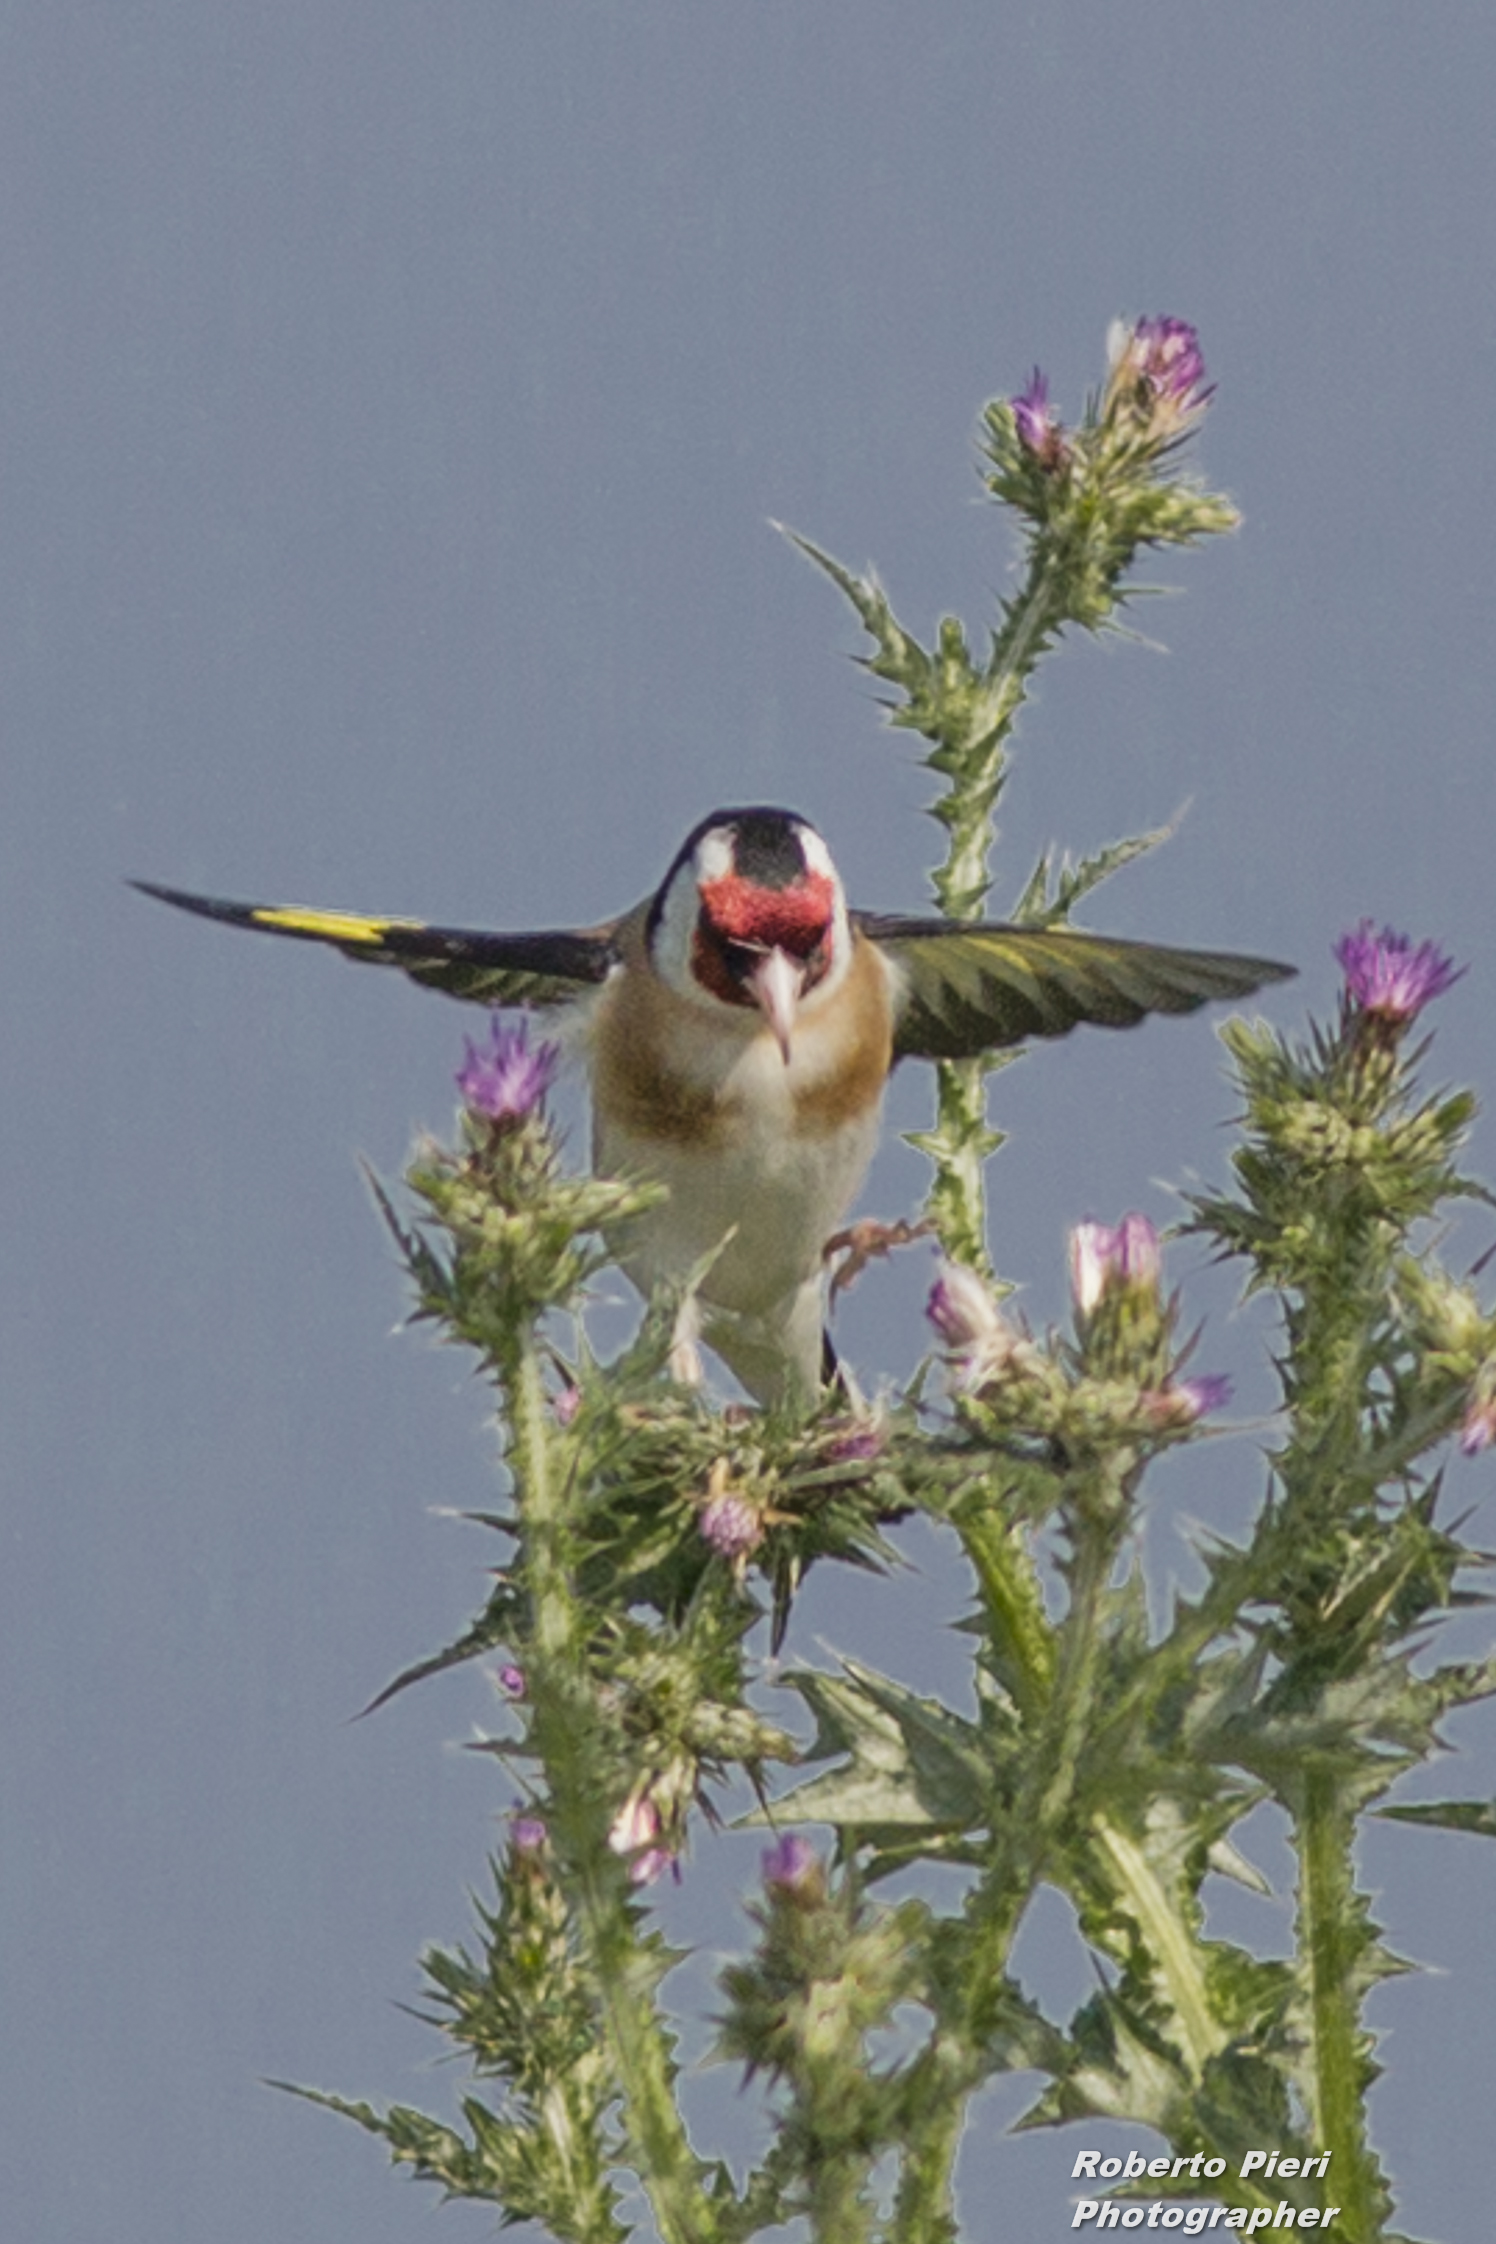 the 'arrival of the Goldfinch...